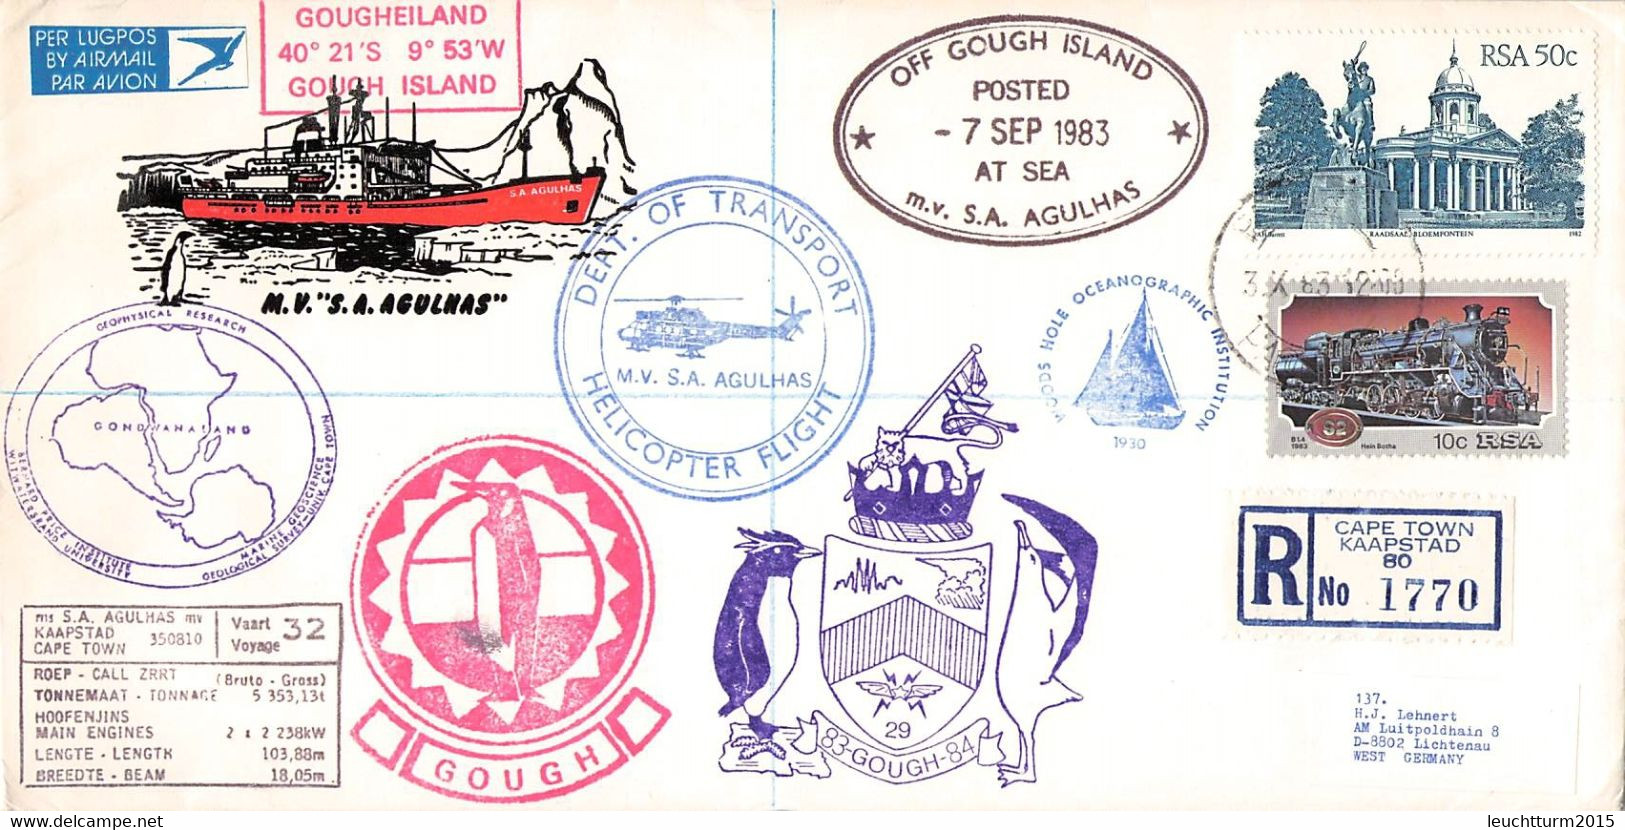 SOUTH AFRICA - POSTED AT SEA OFF GOUGH ISLAND 1983 / GR242 - Covers & Documents